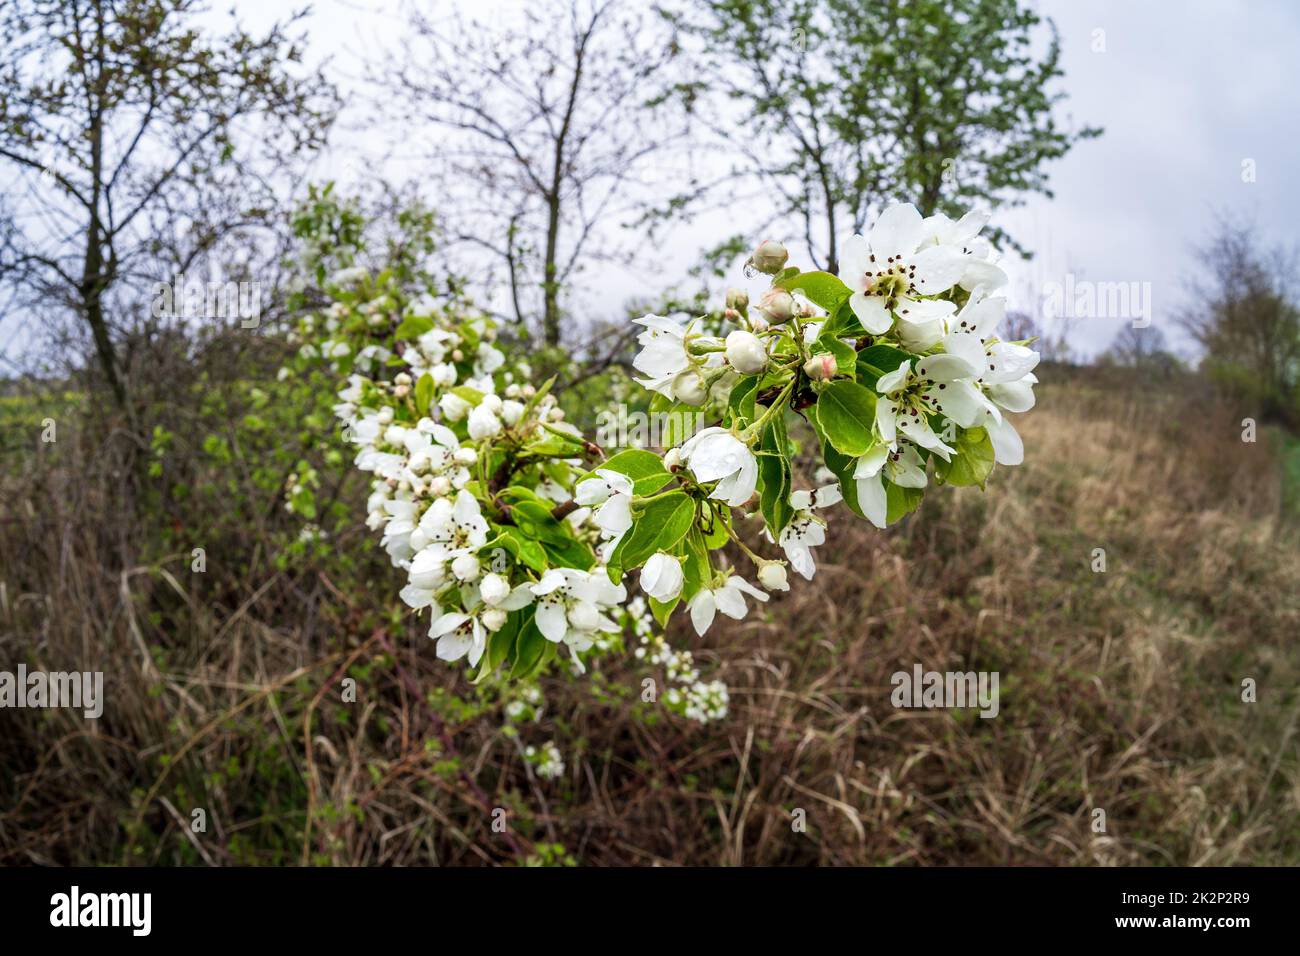 The time of apple blossom. Flowers close-up with raindrops. Stock Photo